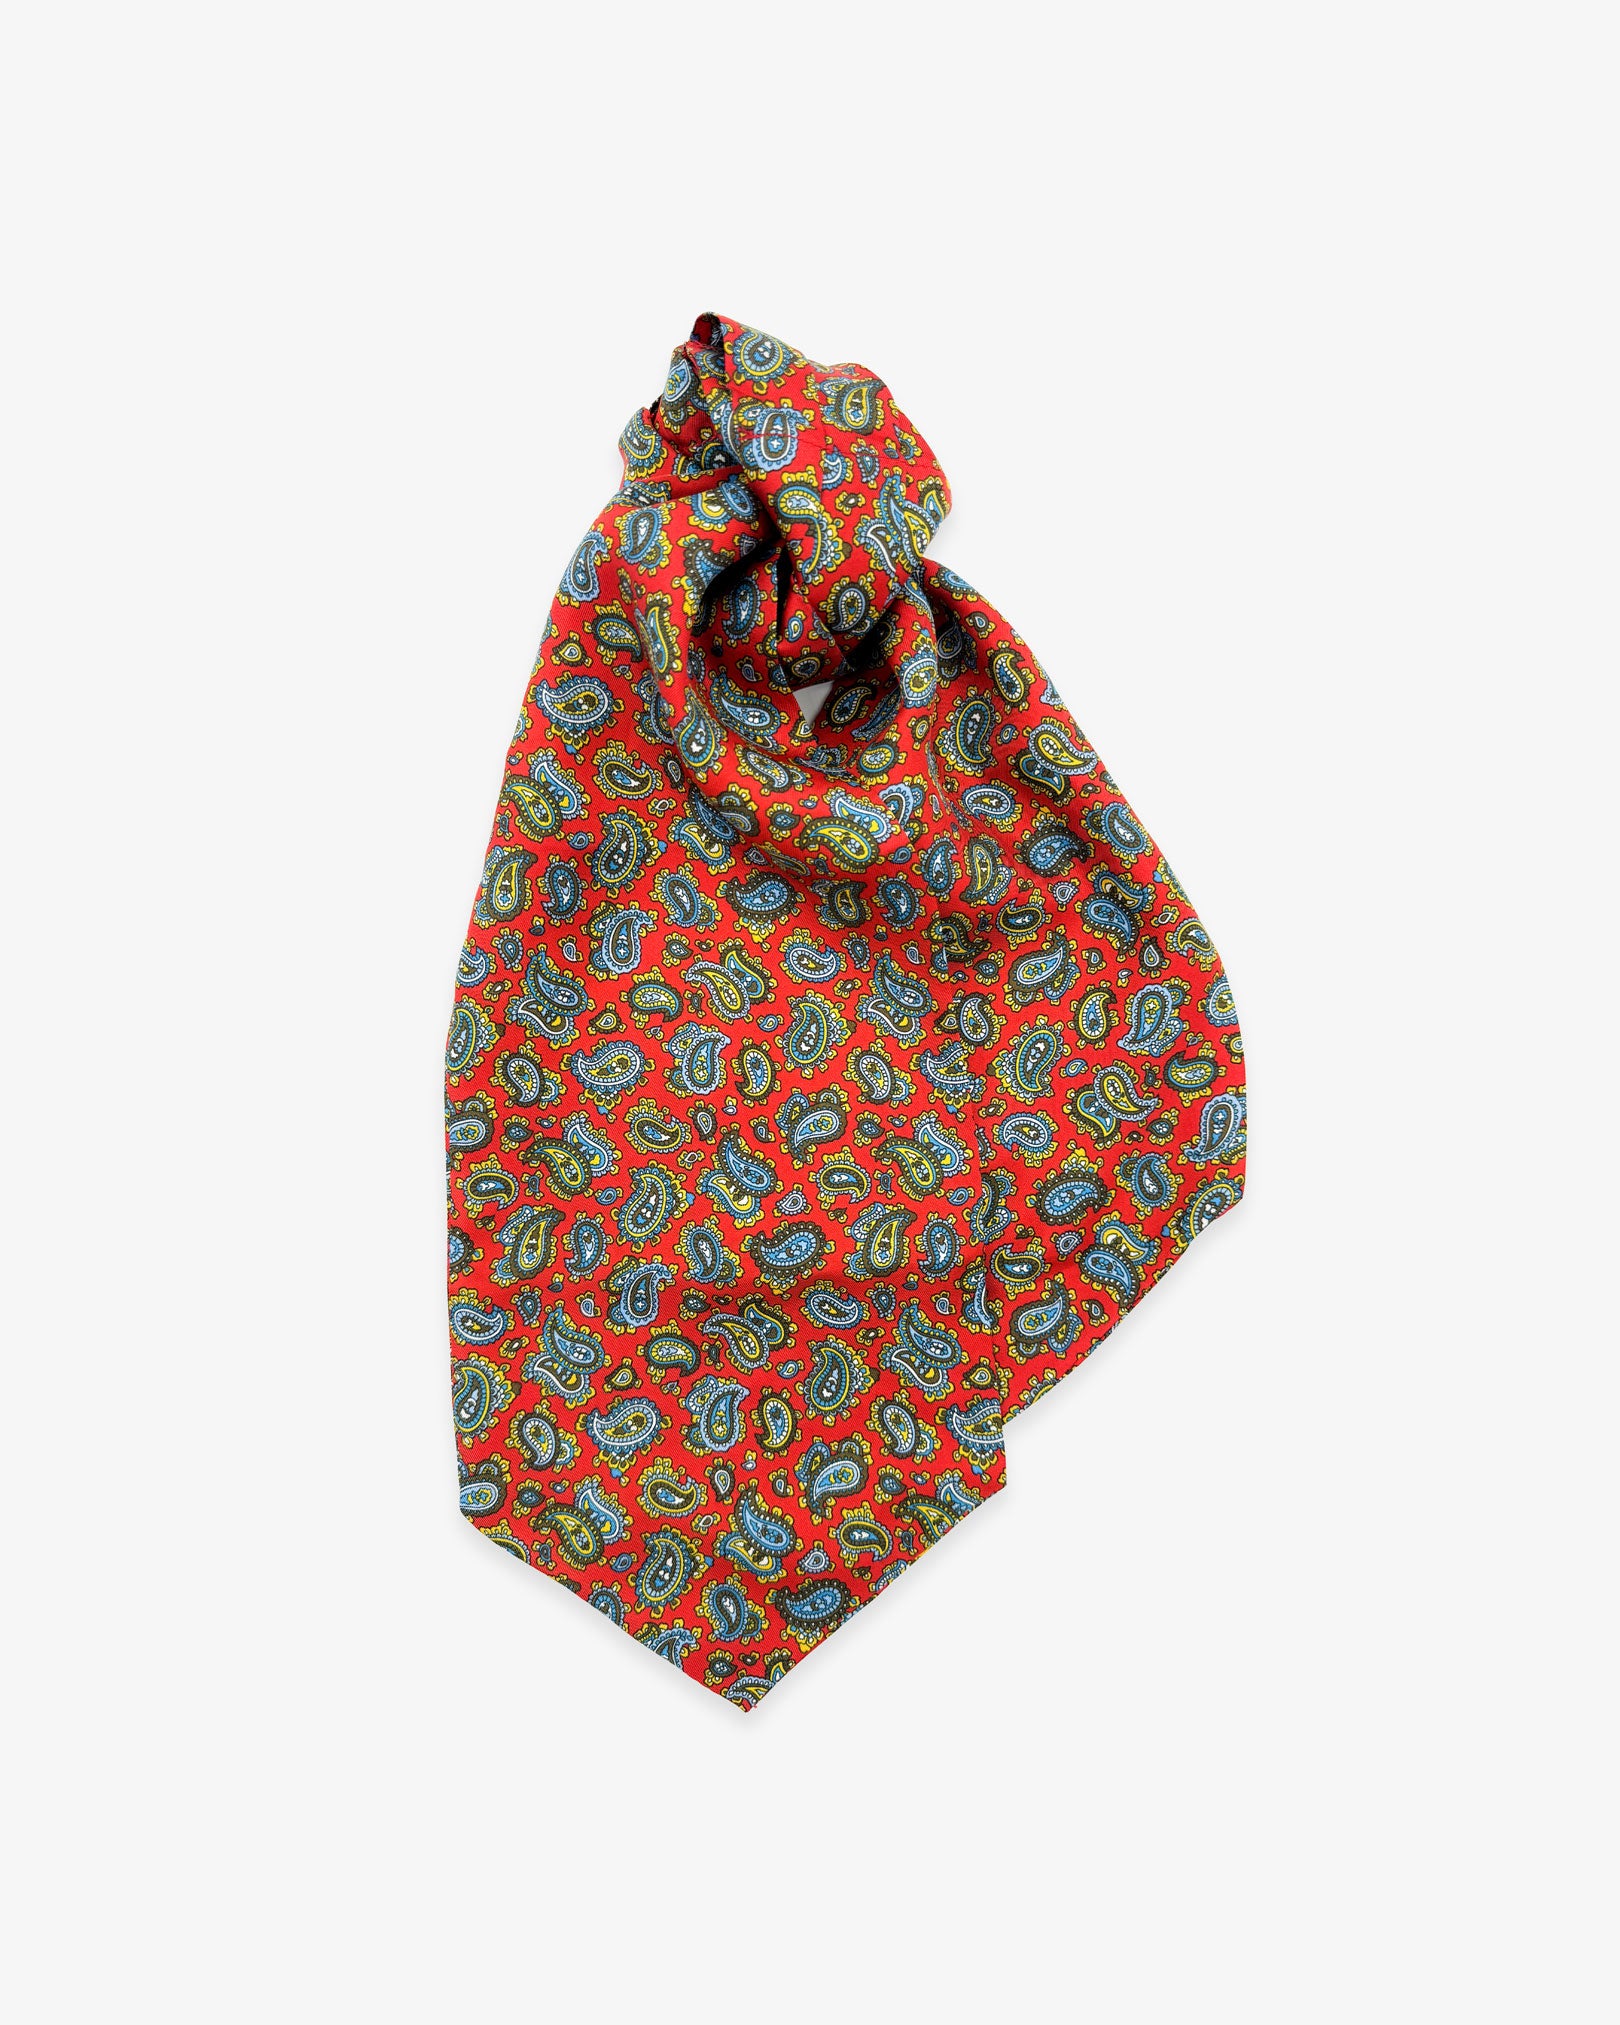 Entire view of 'The Shinjuku' double Ascot tie with wide ends at the bottom and clear view of the small cyan, brown and gold paisley patterns complemented by white accents on a red background.